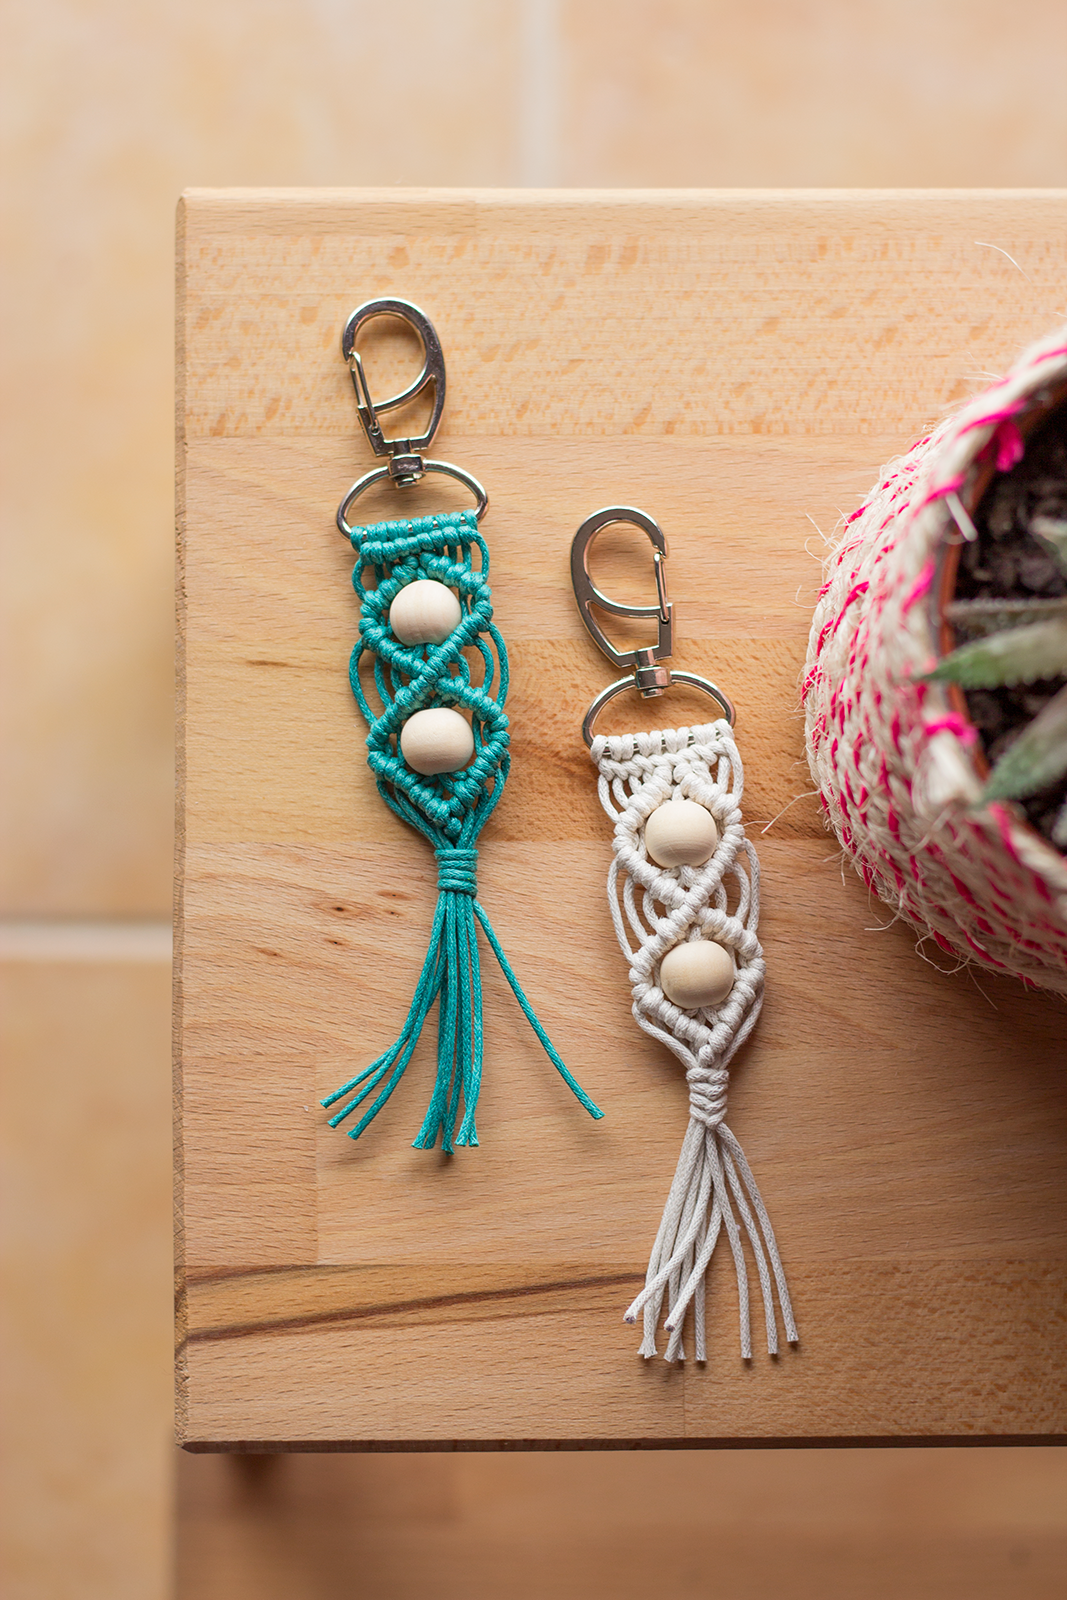 Learn how you can make these macrame keychains that are also great gifts